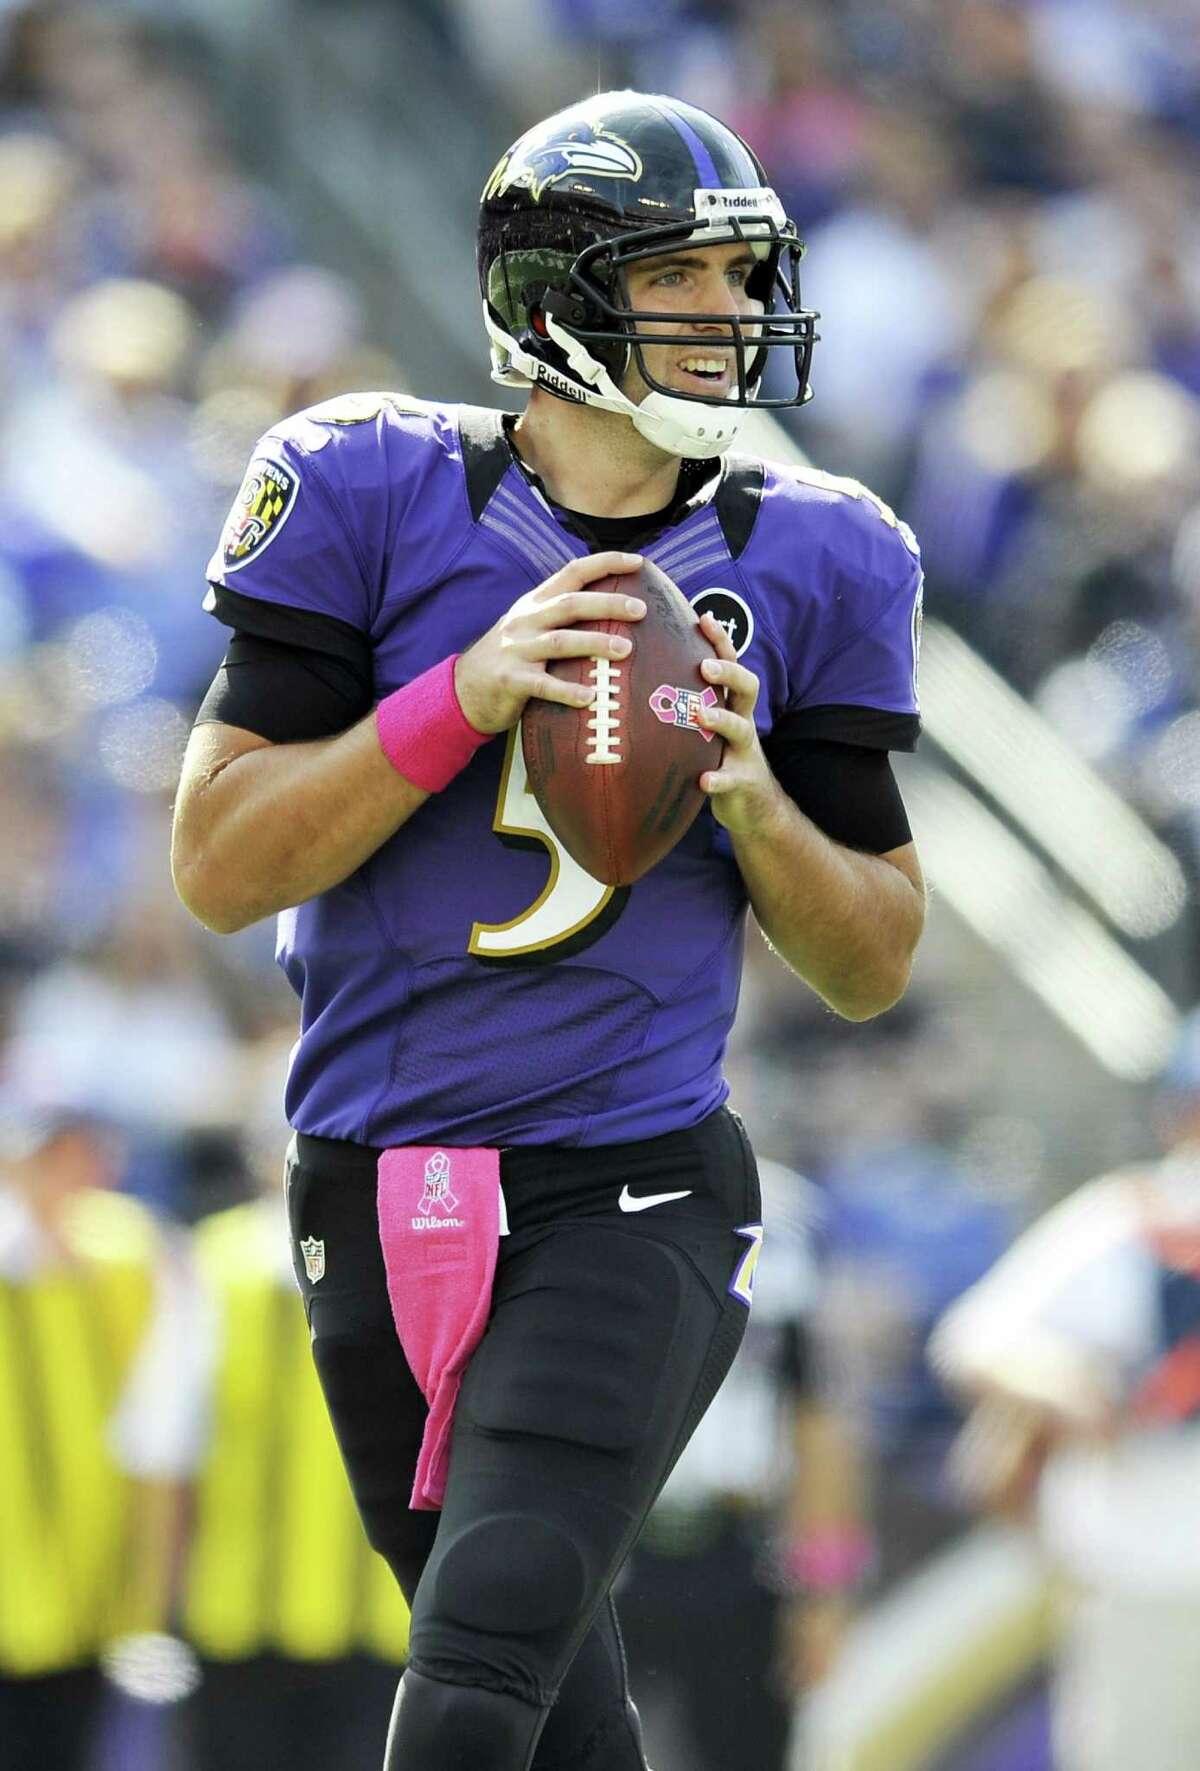 Quarterback Joe Flacco hopes to bail out the Ravens' injury-ravaged defense and raise his record to 5-0 against the Texans.